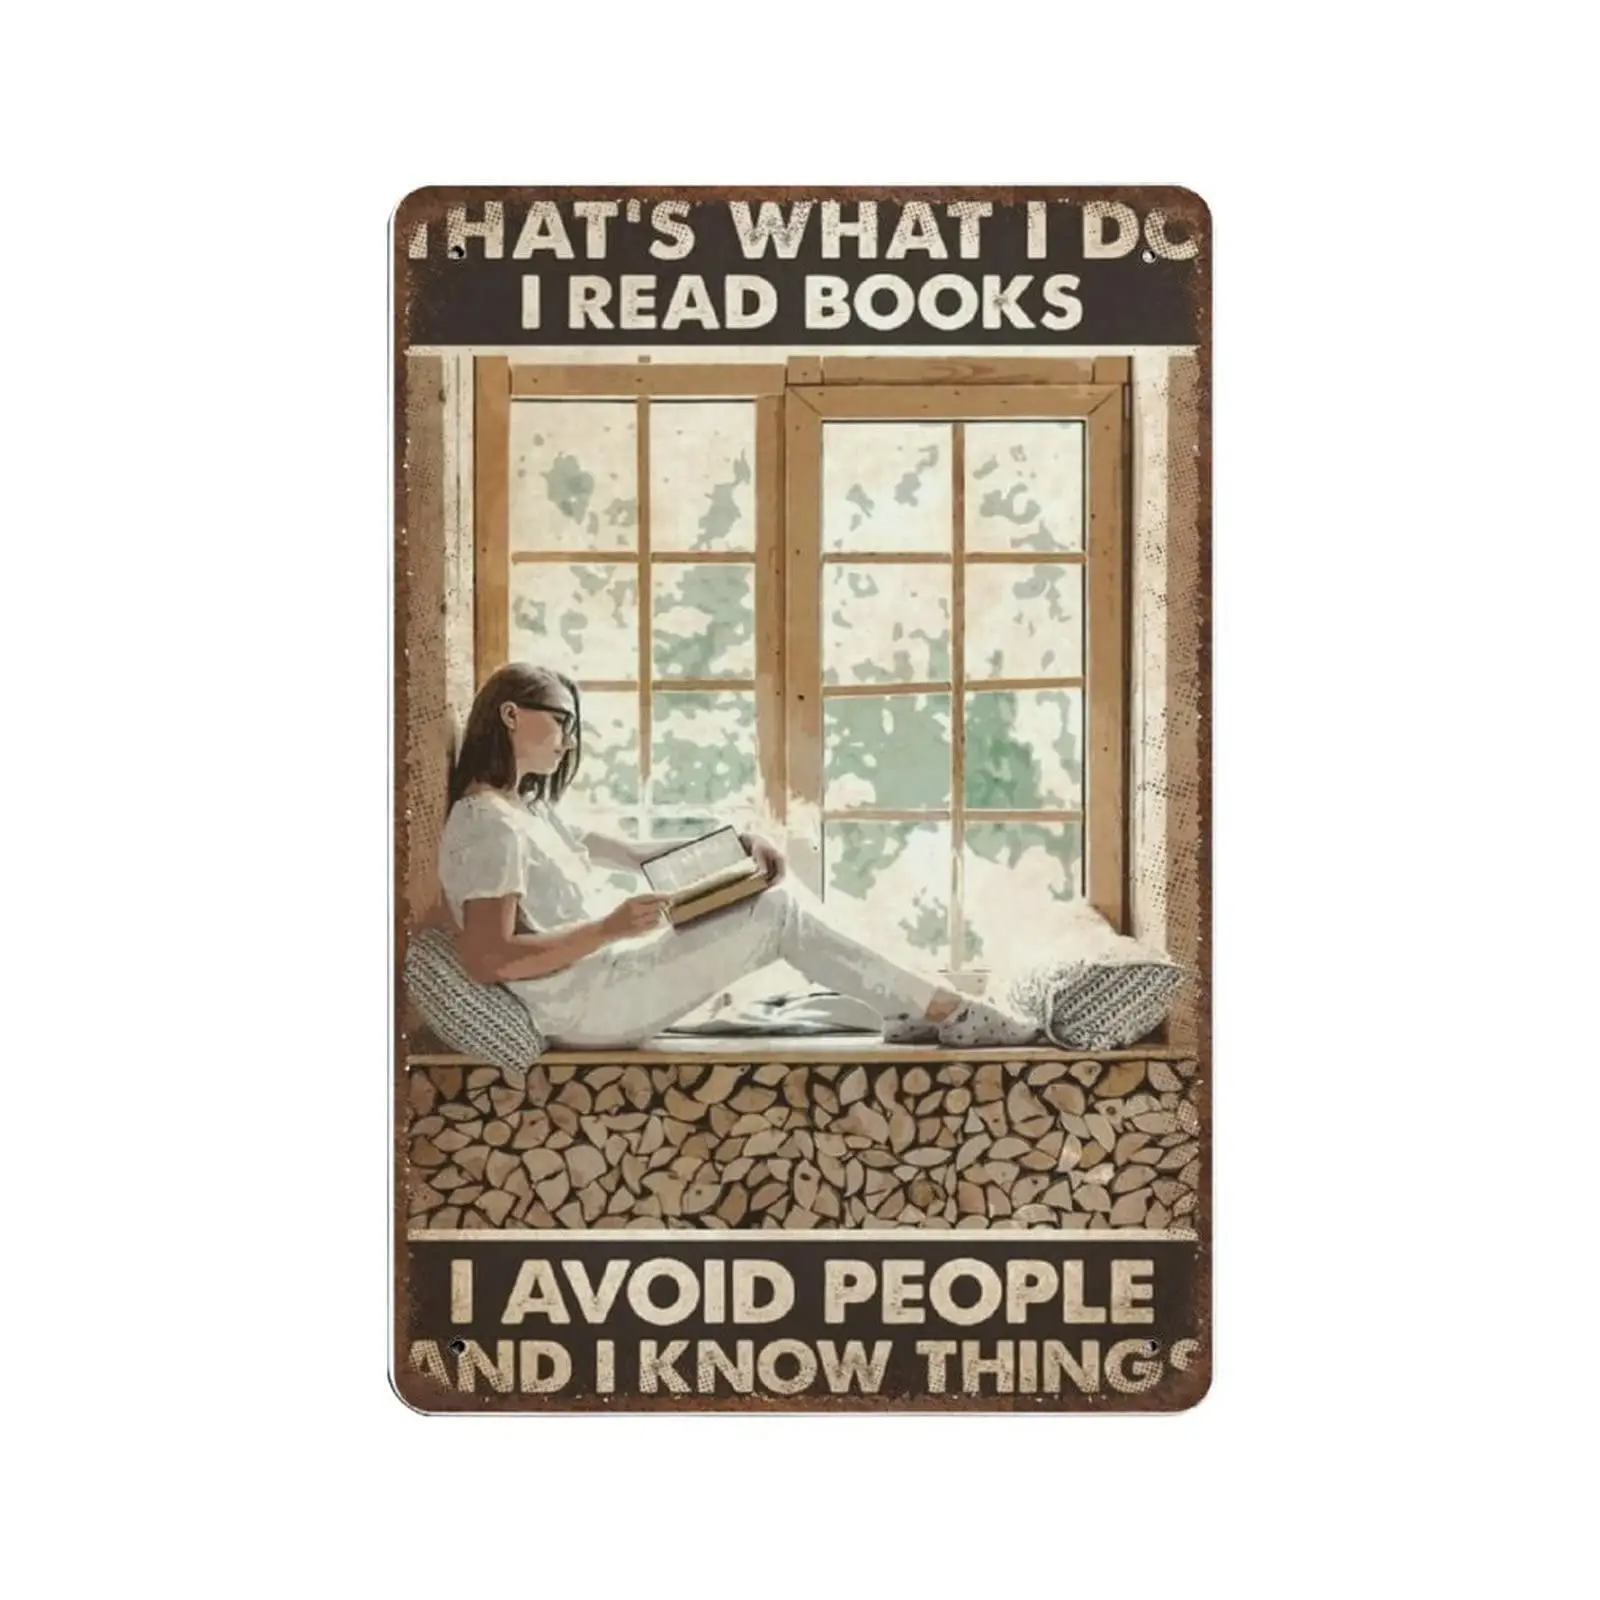 

Reading Girl Vintage metal Hanging Plaque That'S What I Do I I Read Books Avoid People Wall Decor Bedroom Man Cave Bar Club